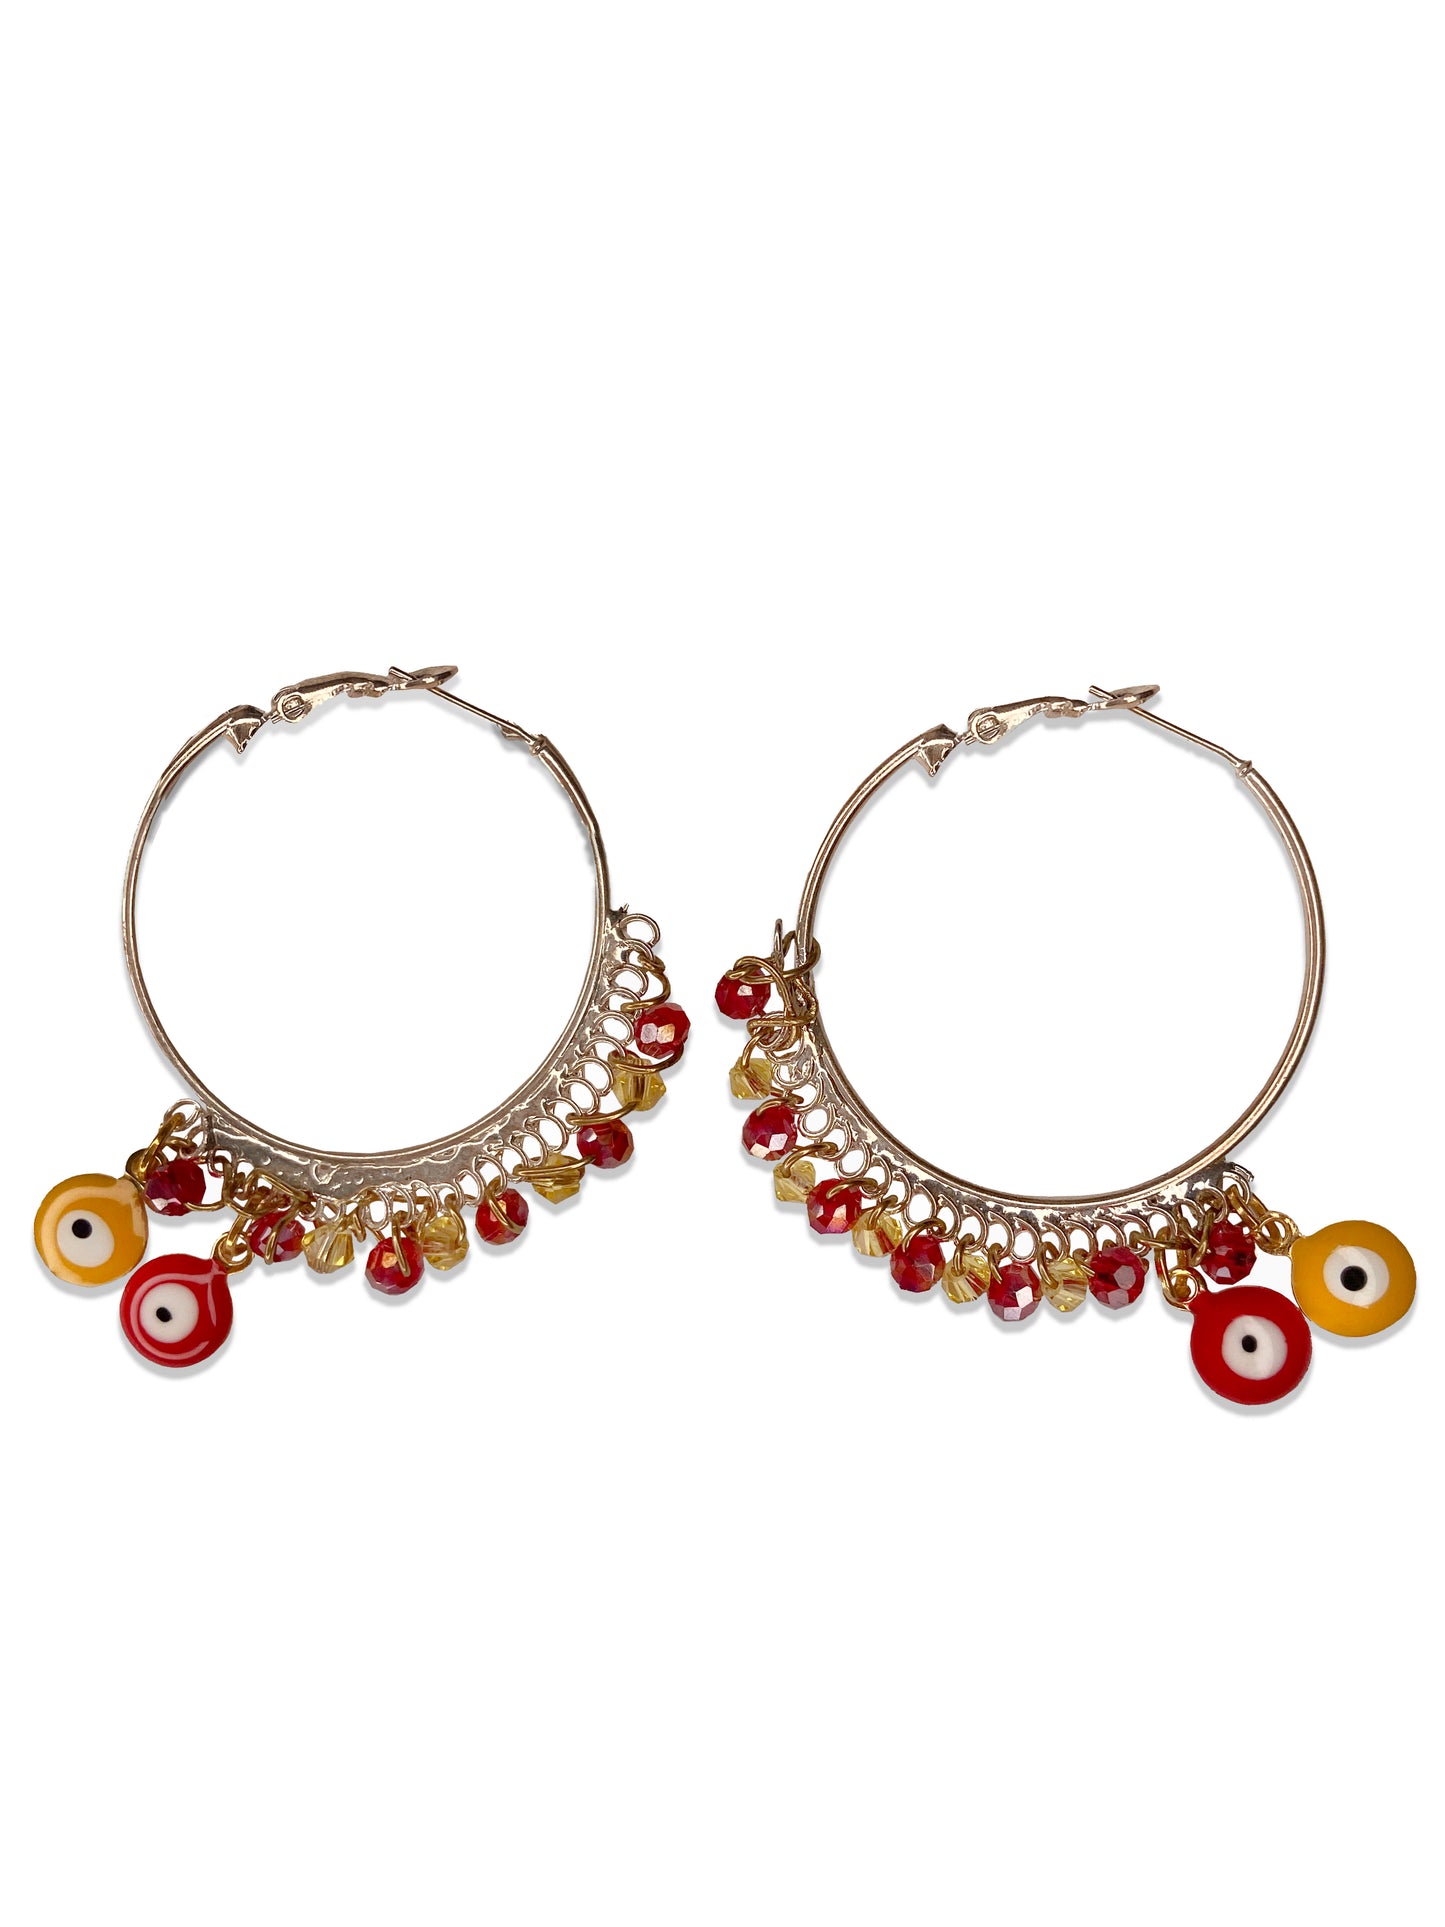 Handmade red and yellow evil eye charm and crystal beaded silver hoops. 